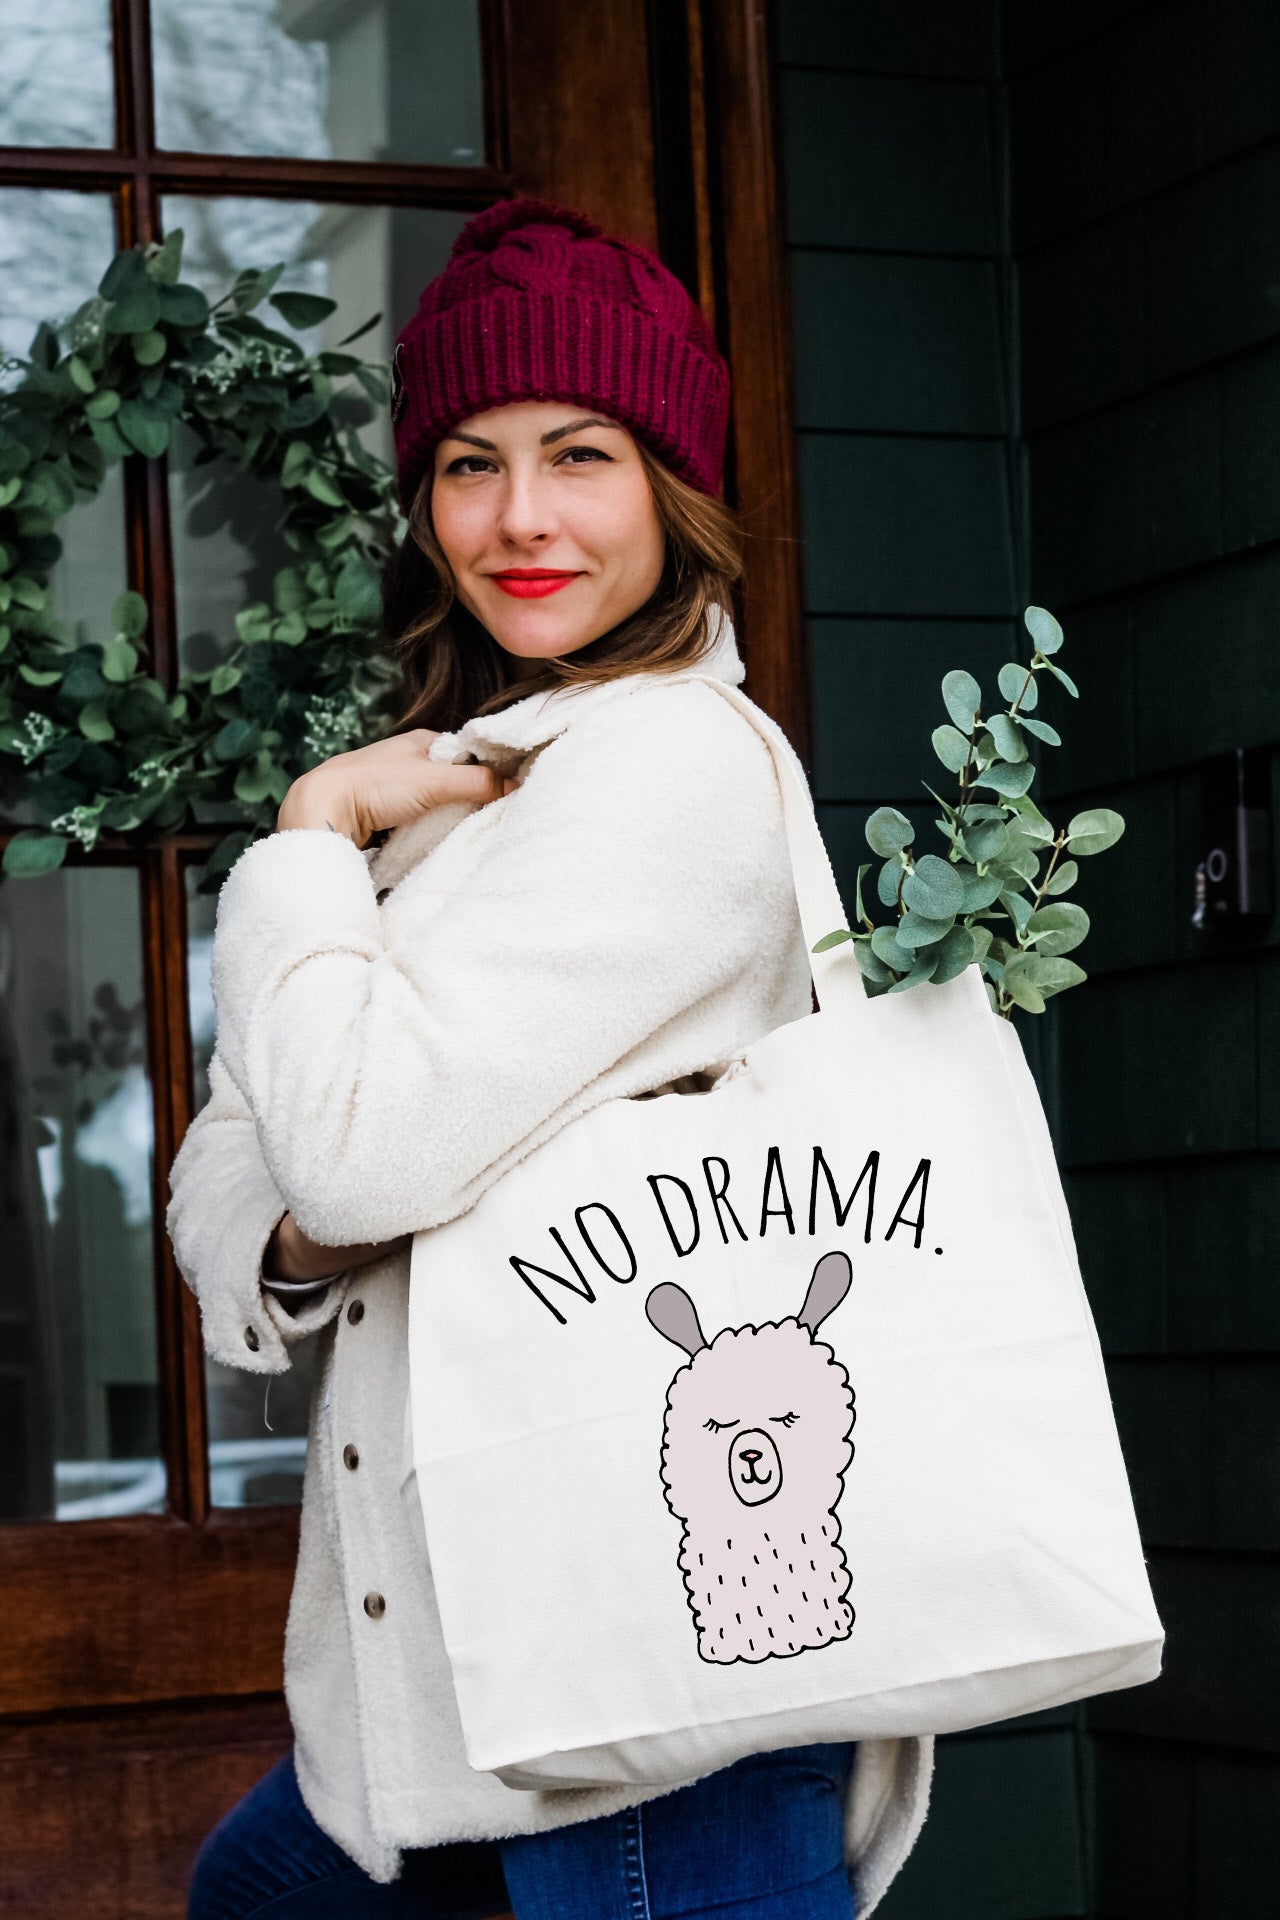 a woman carrying a bag that says no drama